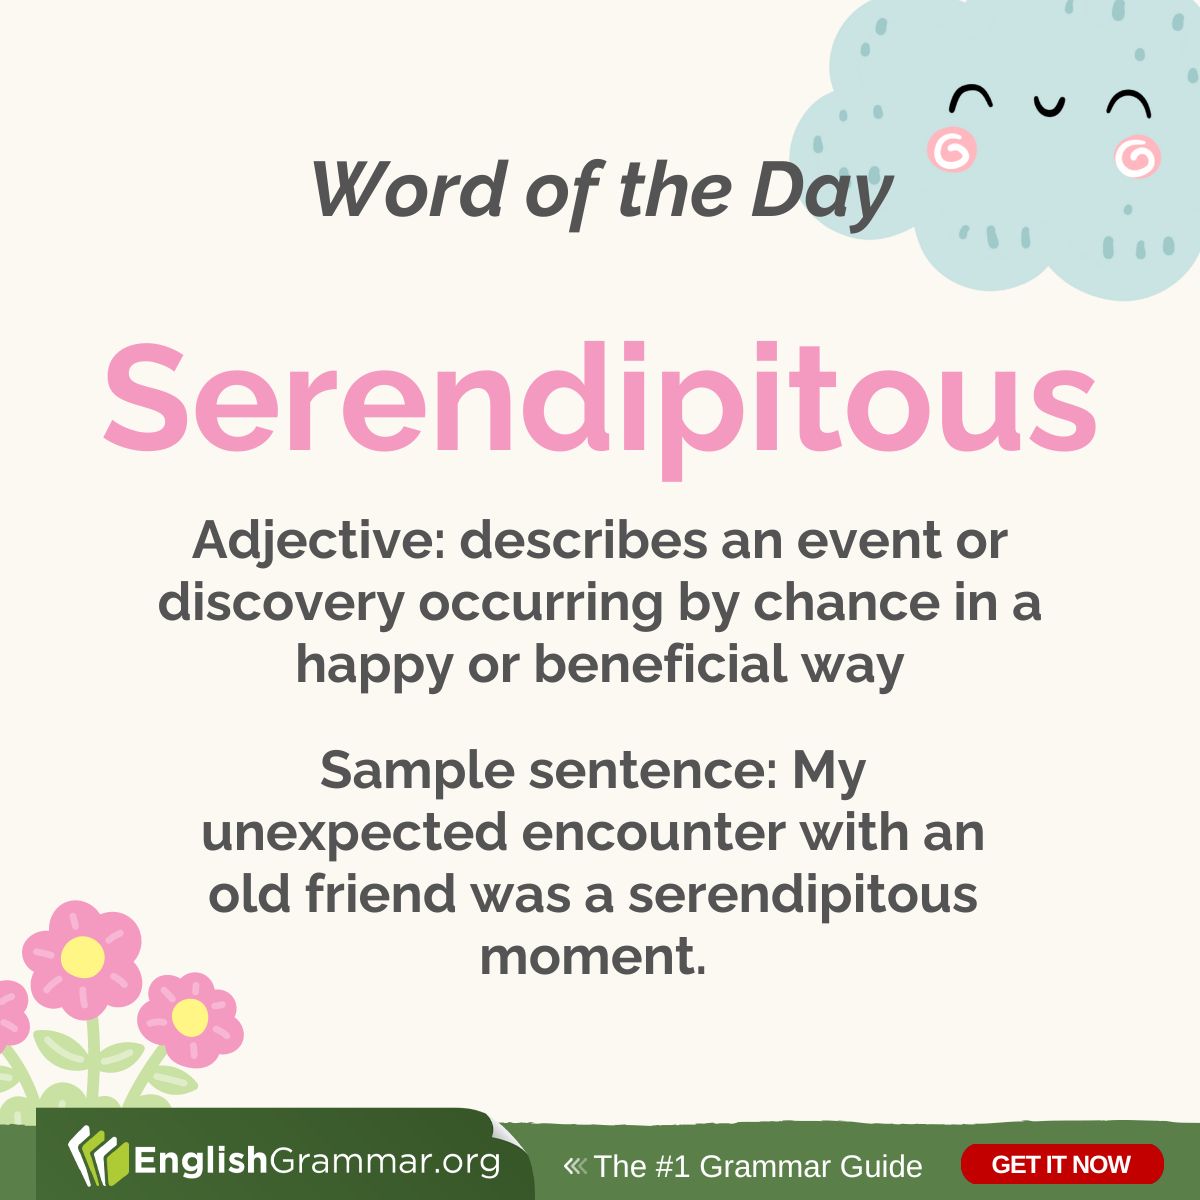 What is 'serendipitous'? #vocabulary #writing #grammar